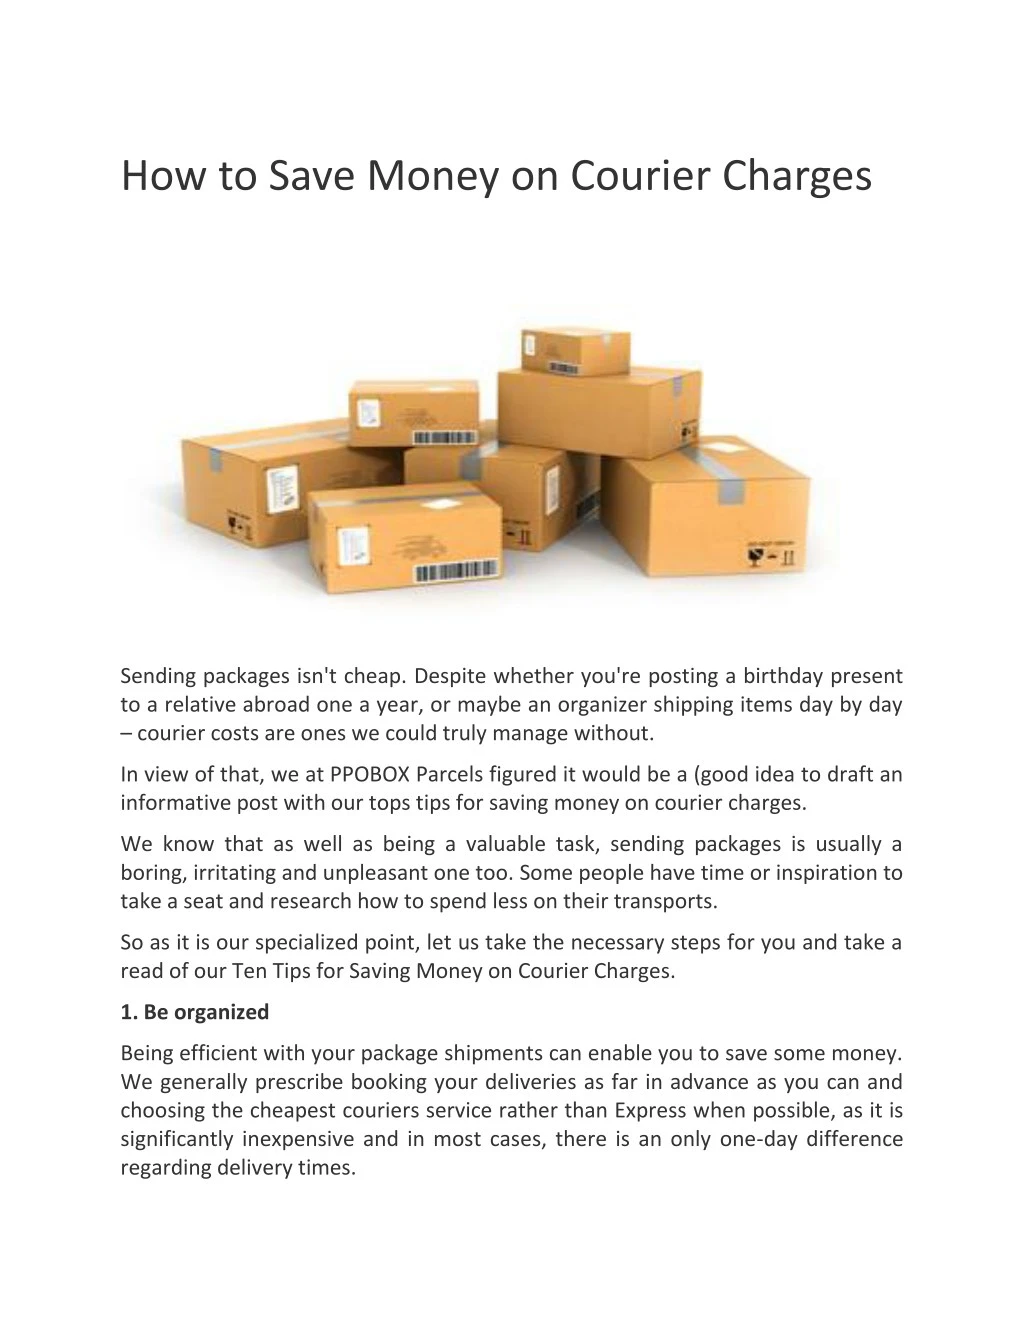 how to save money on courier charges